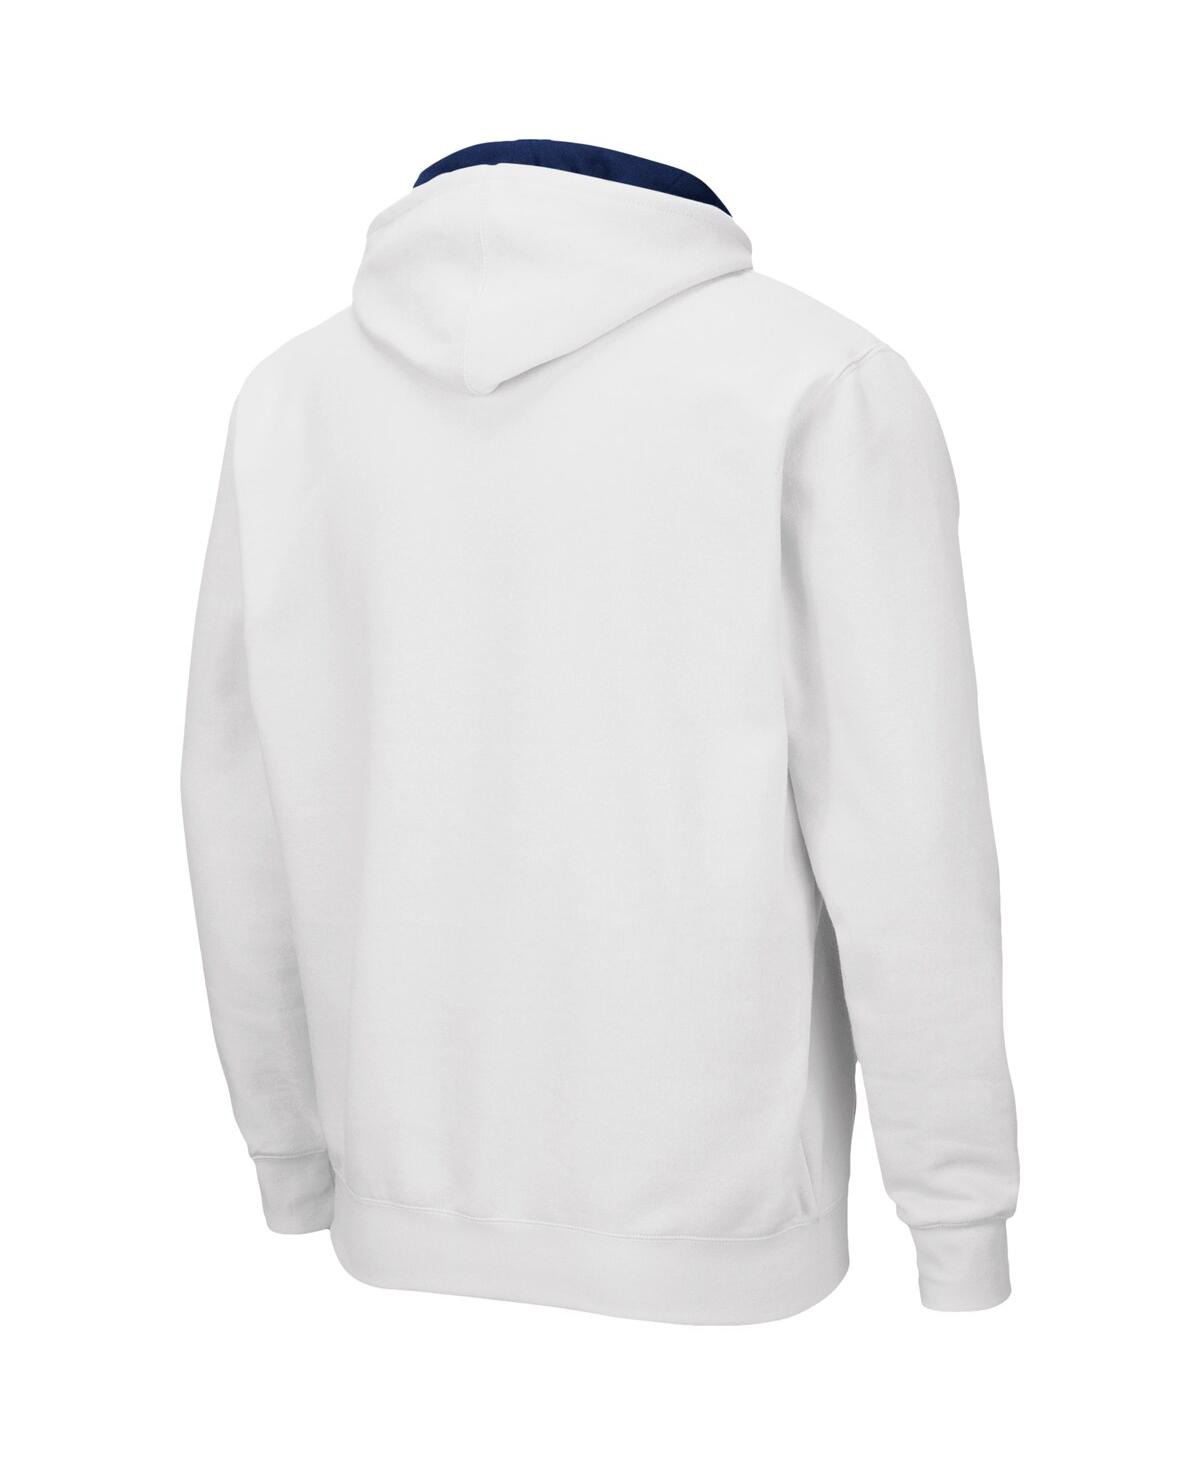 Shop Colosseum Men's  White Michigan Wolverines Arch And Logo 3.0 Full-zip Hoodie